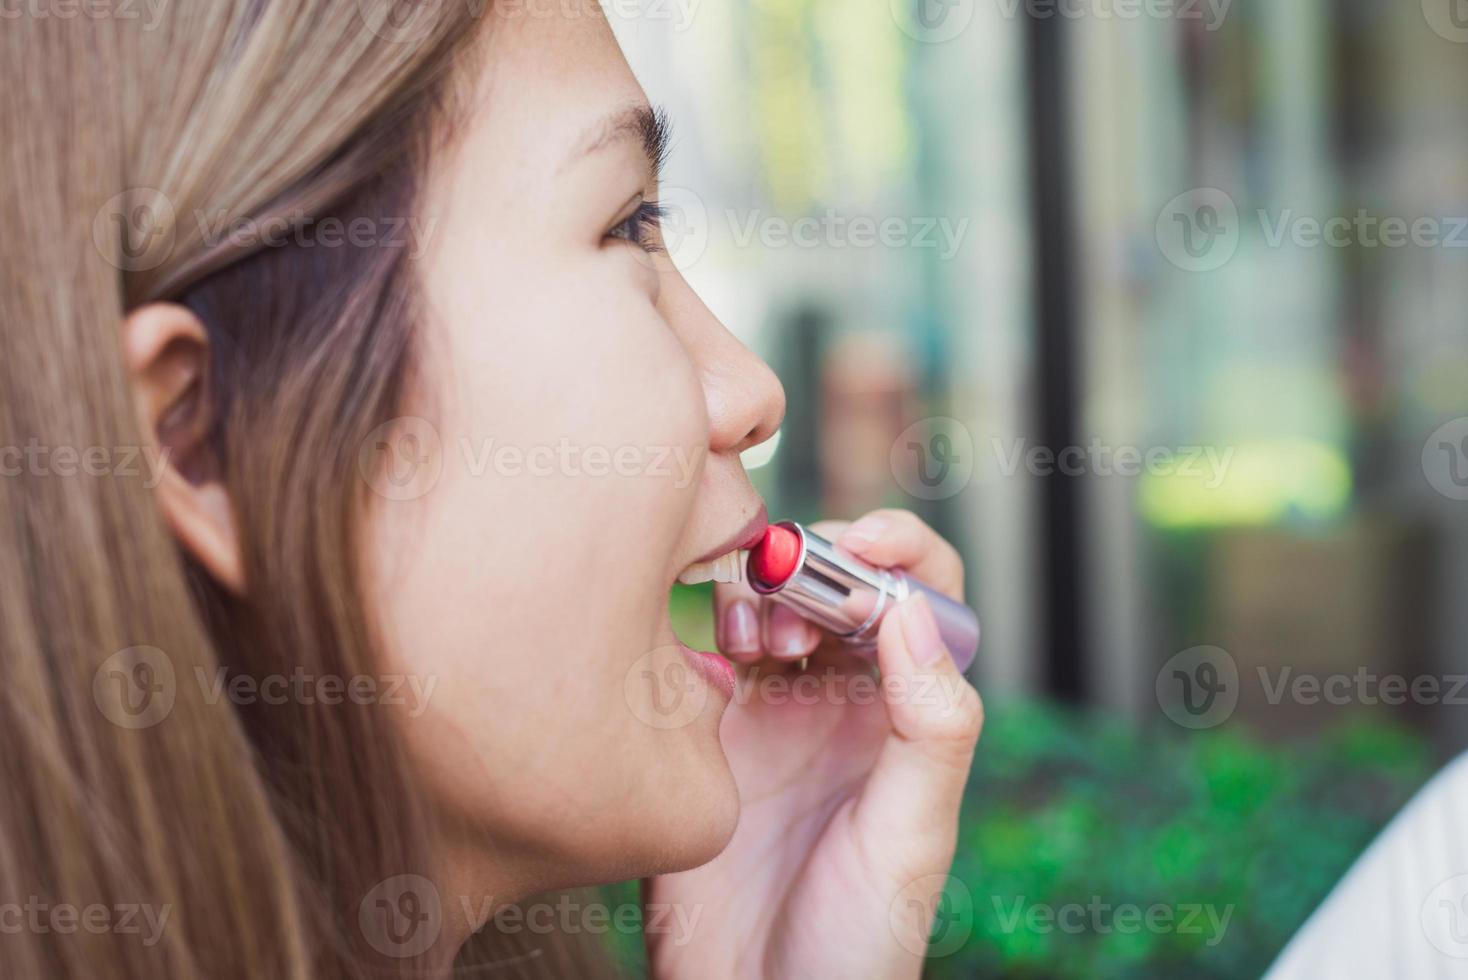 Young Asian woman using lipstick make up in front mirror, Happy female using beauty cosmetics to improve herself ready to working in bedroom at home. Lifestyle women at home concept. photo